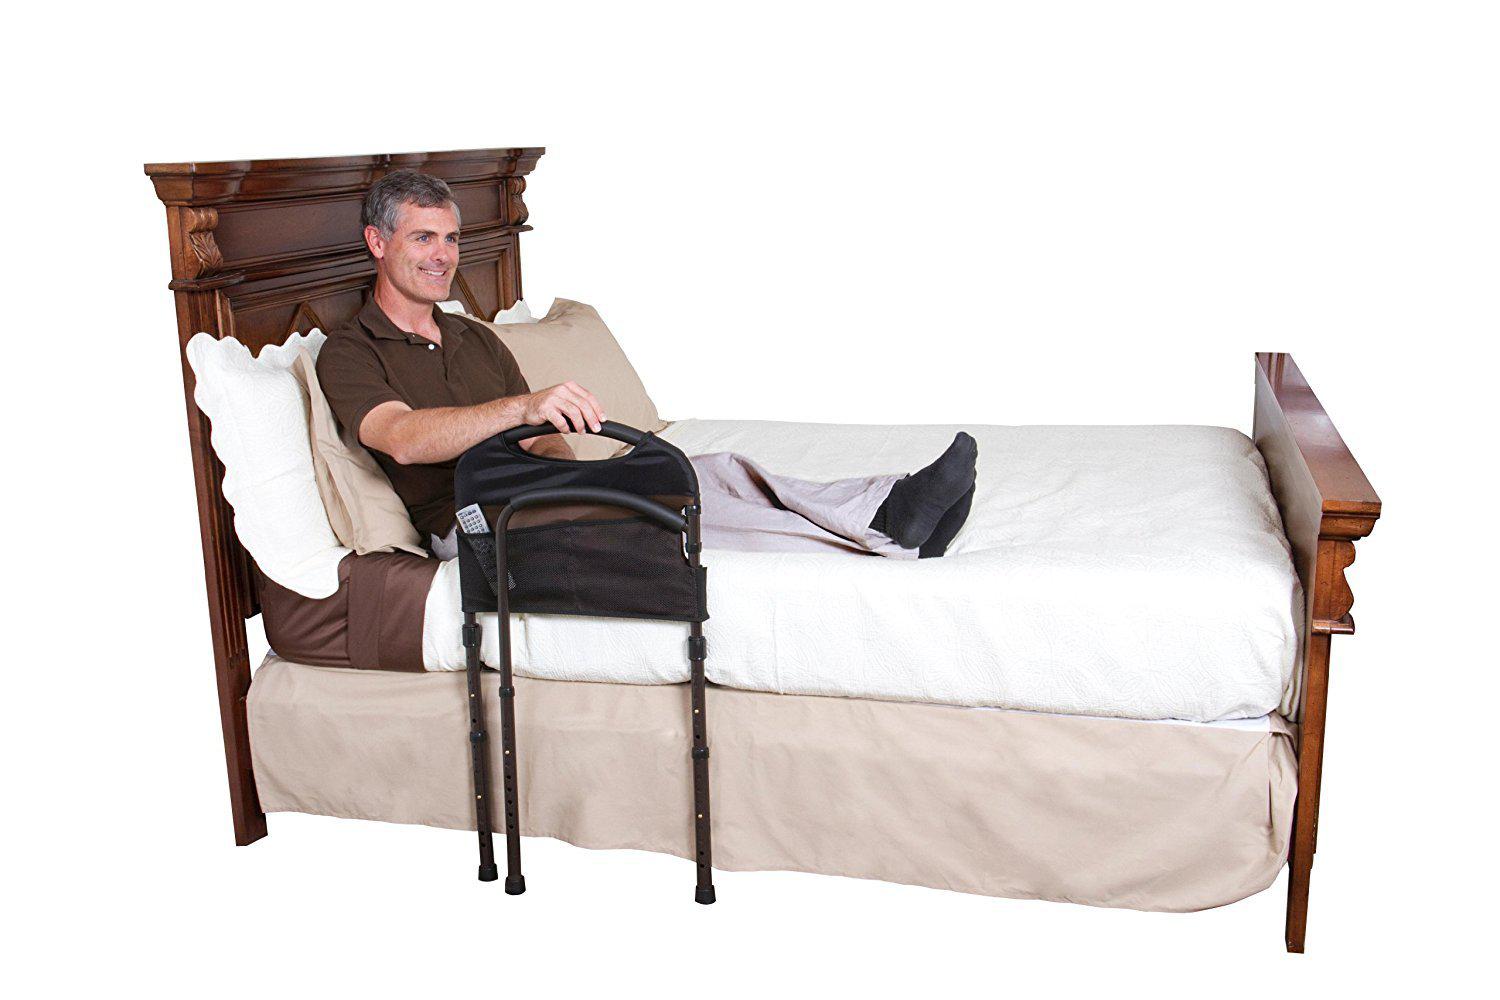 Man sitting in a bed holding onto a Stander Mobility Bed Rail